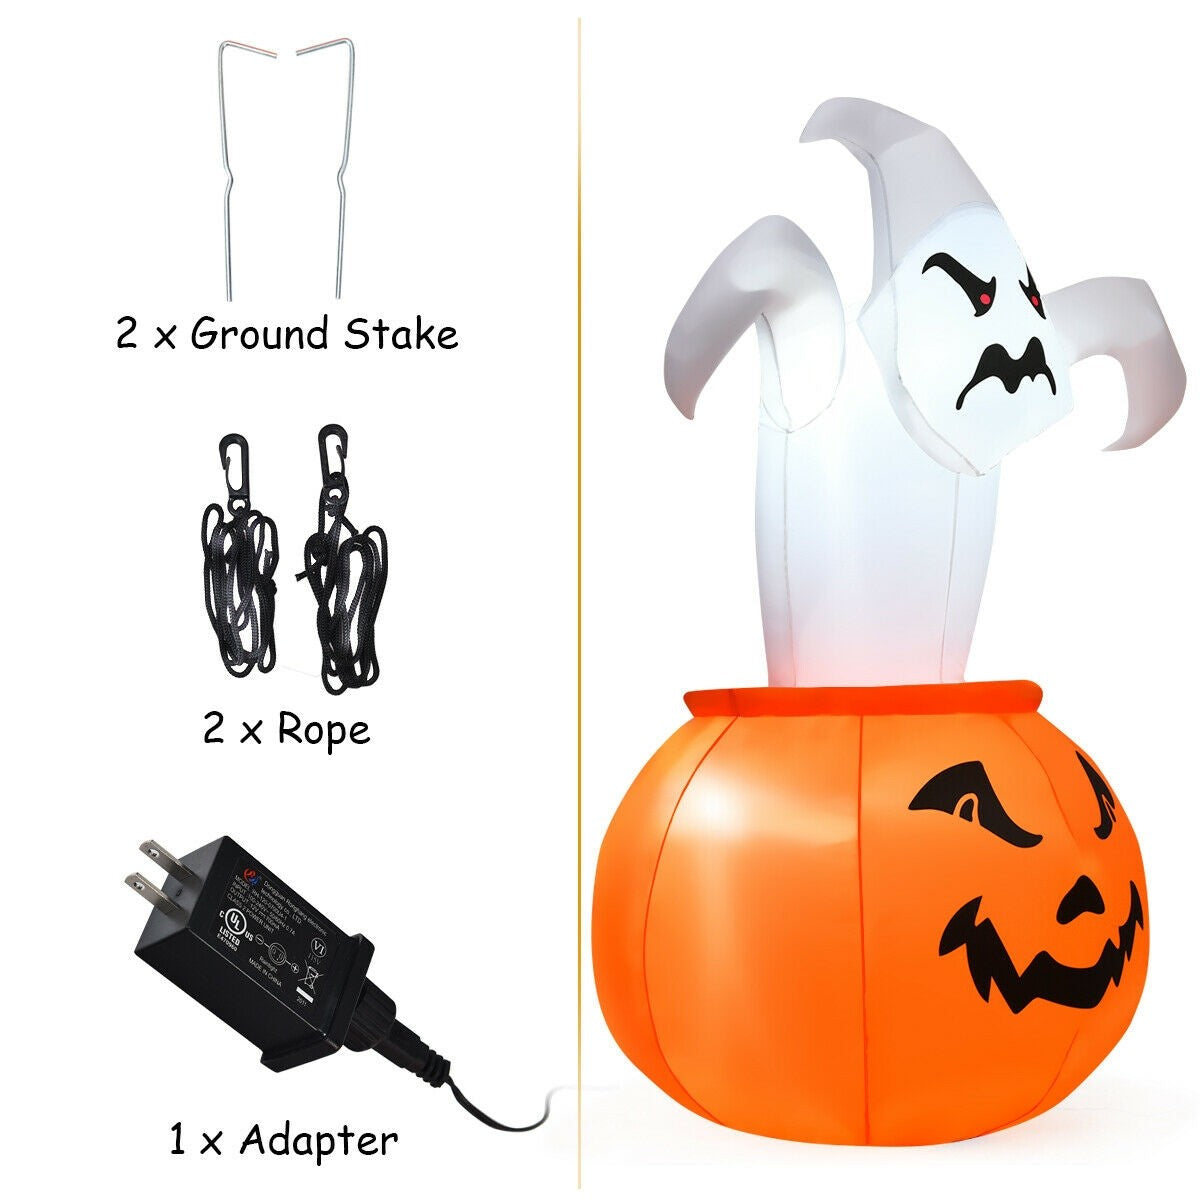 6 FT Halloween Blow-Up Inflatable Ghost in Pumpkin with LED Light